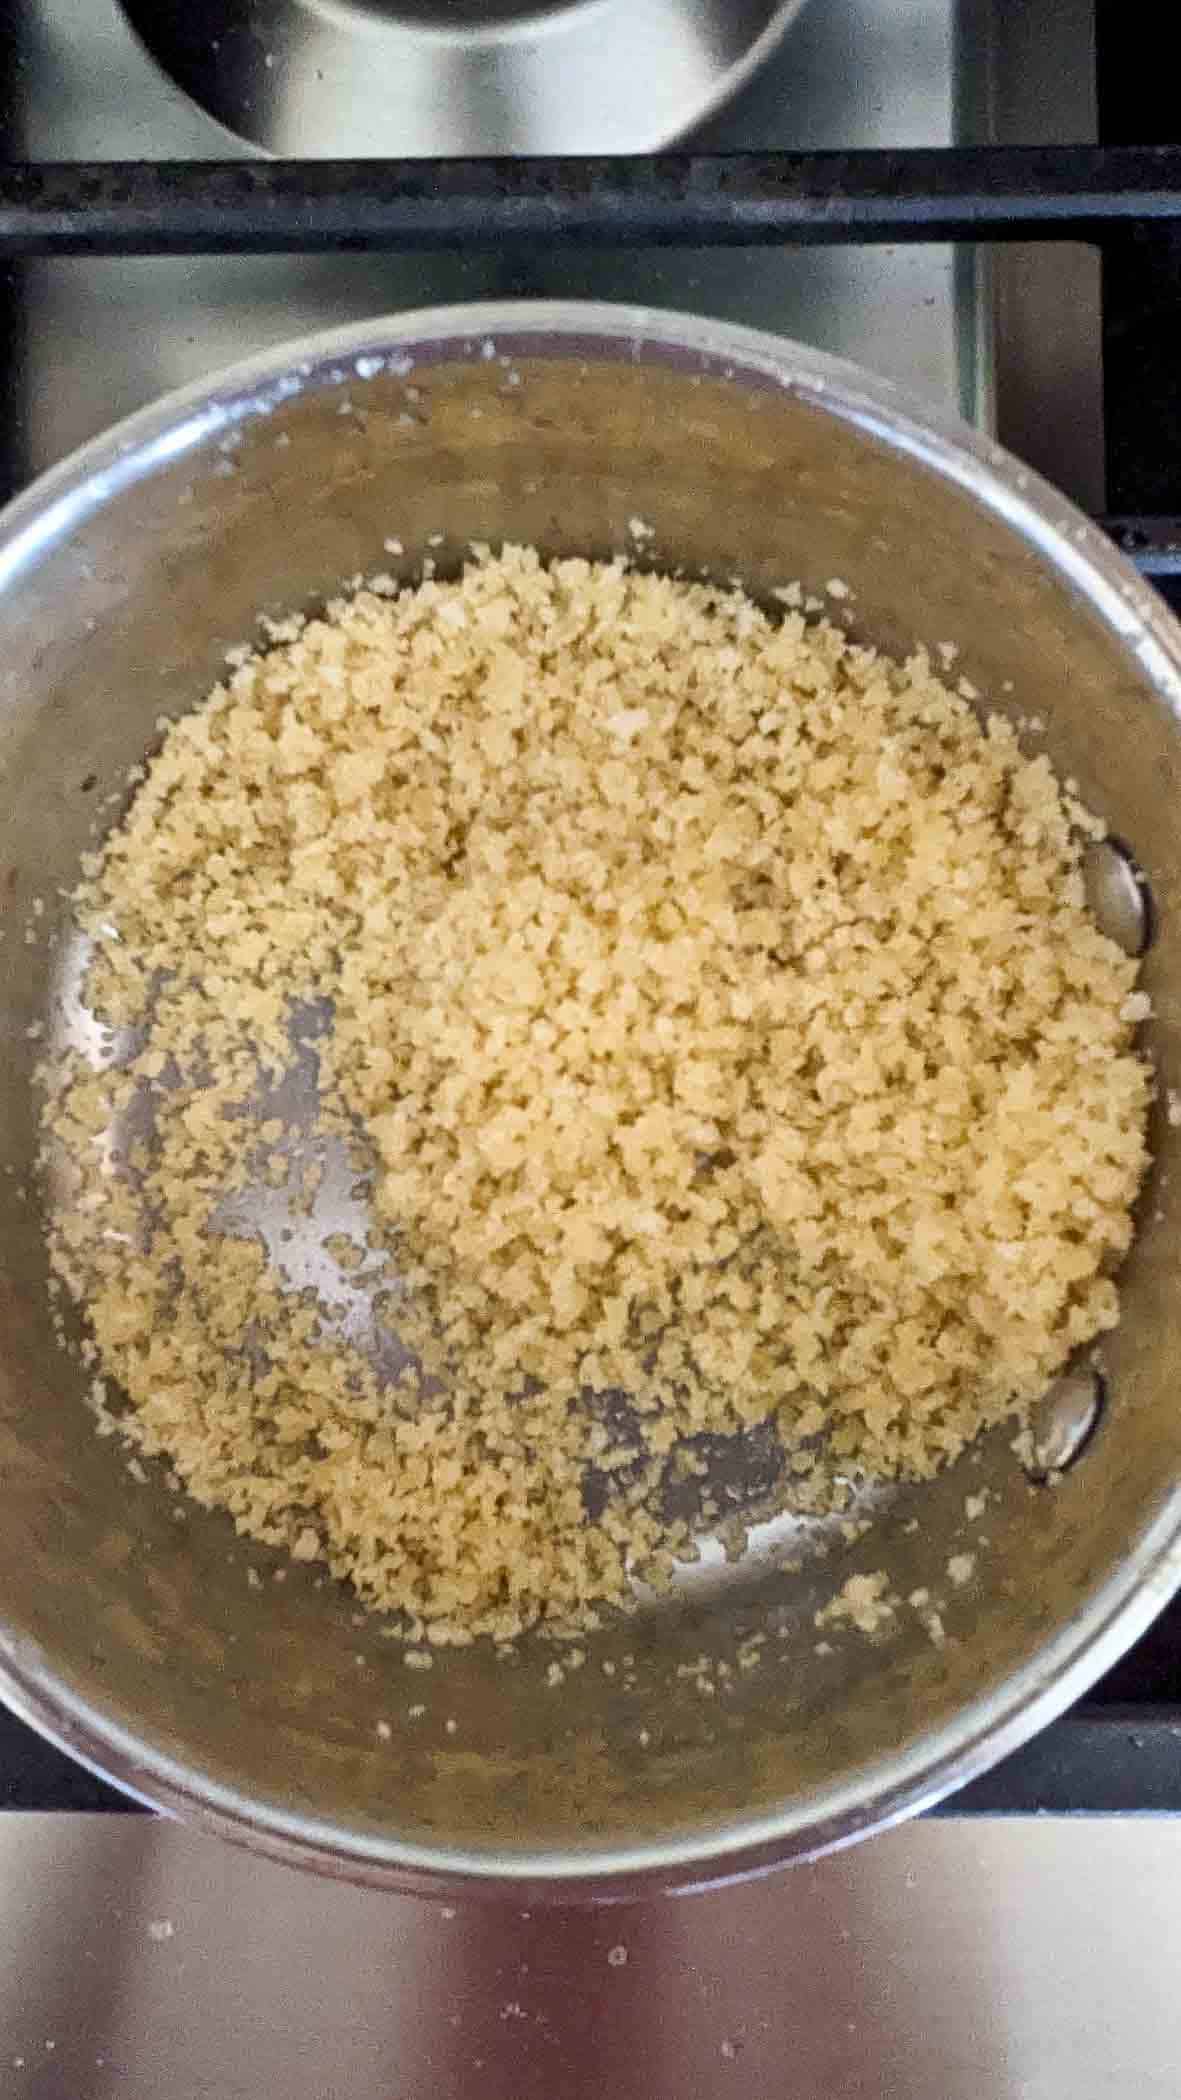 panko breadcrumbs mixed with butter on stovetop.